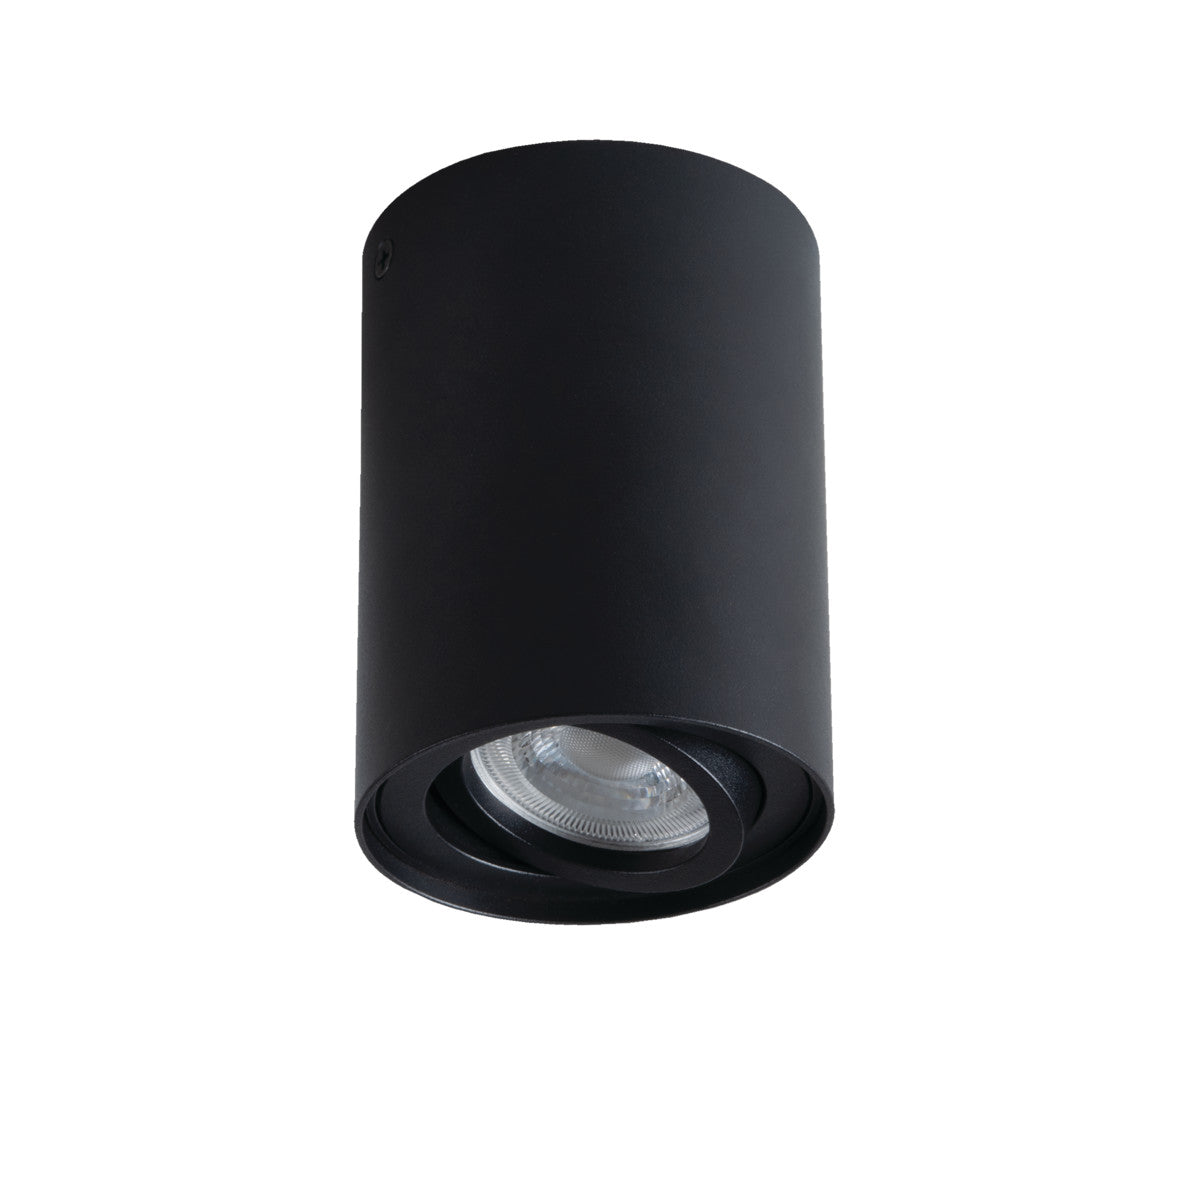 Kanlux BORD XS GU10 Ceiling Surface Mounted Adjustable Spot Down Light Fitting